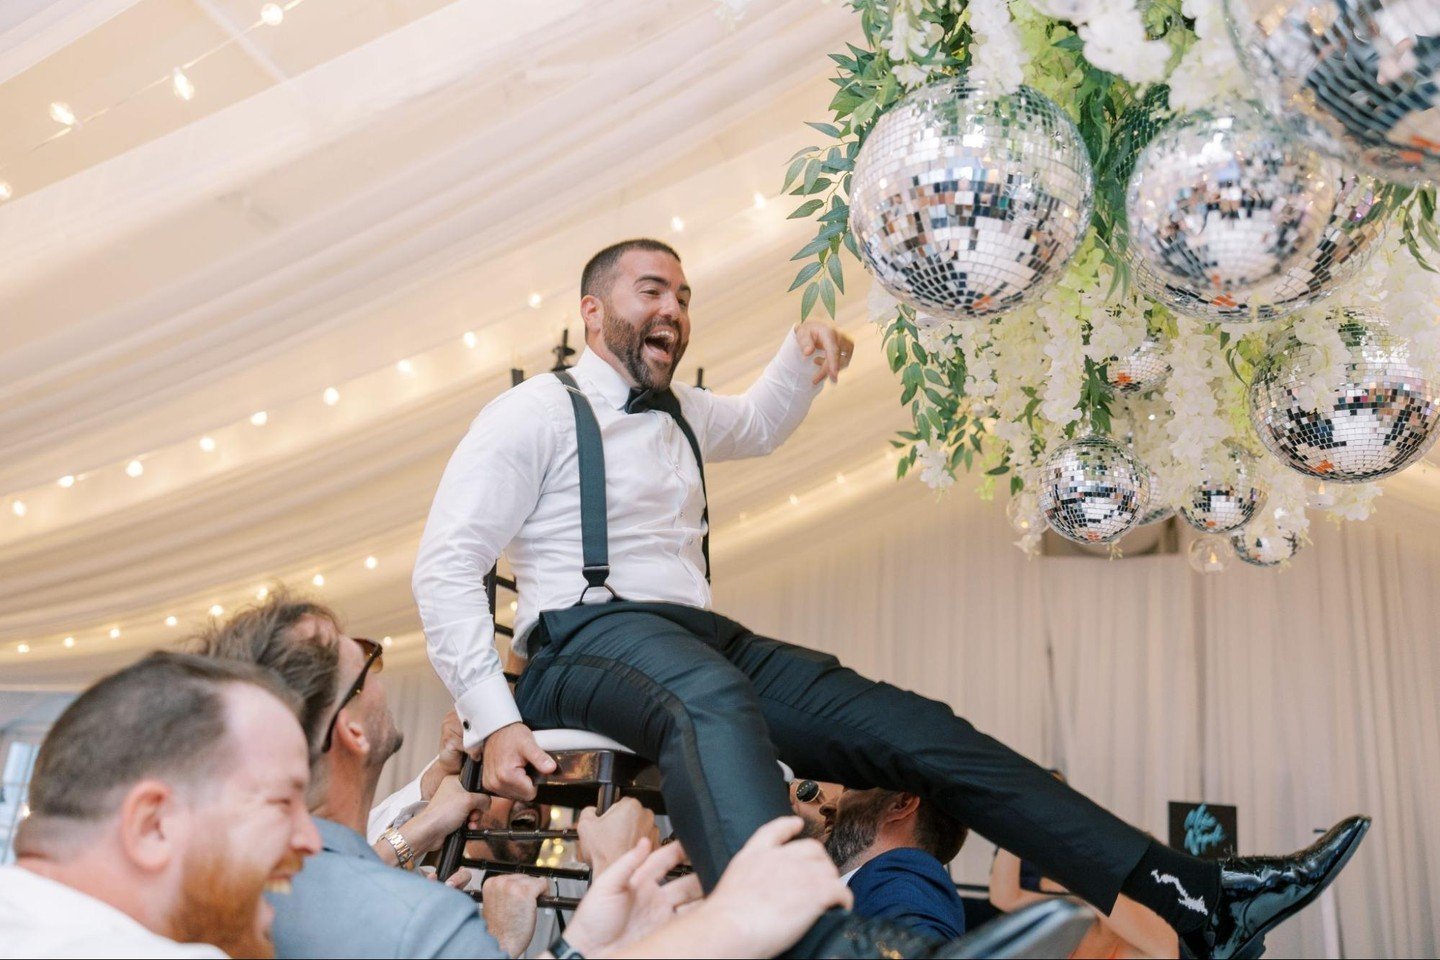 Meet us where the disco ball illuminates the dancefloor

Our greenery chandelier and disco balls set the stage for an epic celebration, don&rsquo;t you agree?

Planning: @_theluxeaffair
DJ: @djmikenapoli
Photo: @carolinemorrisphoto
Venue: @thesagamor